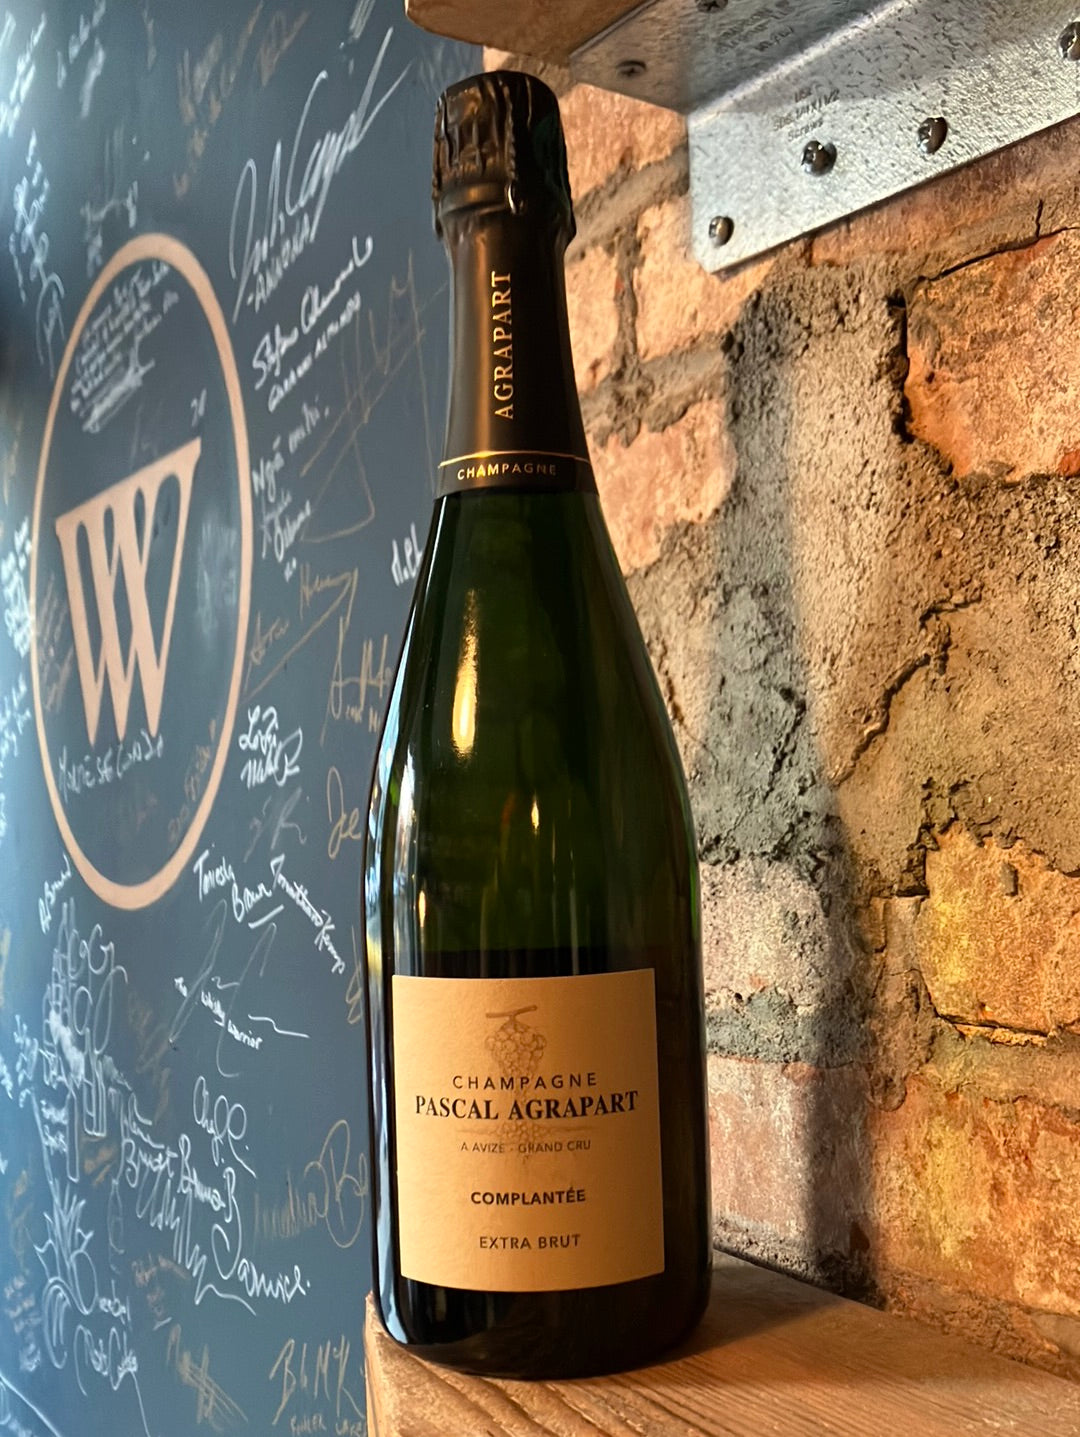 Champagne Agrapart "Complantee" Extra Brut Grand Cru NV